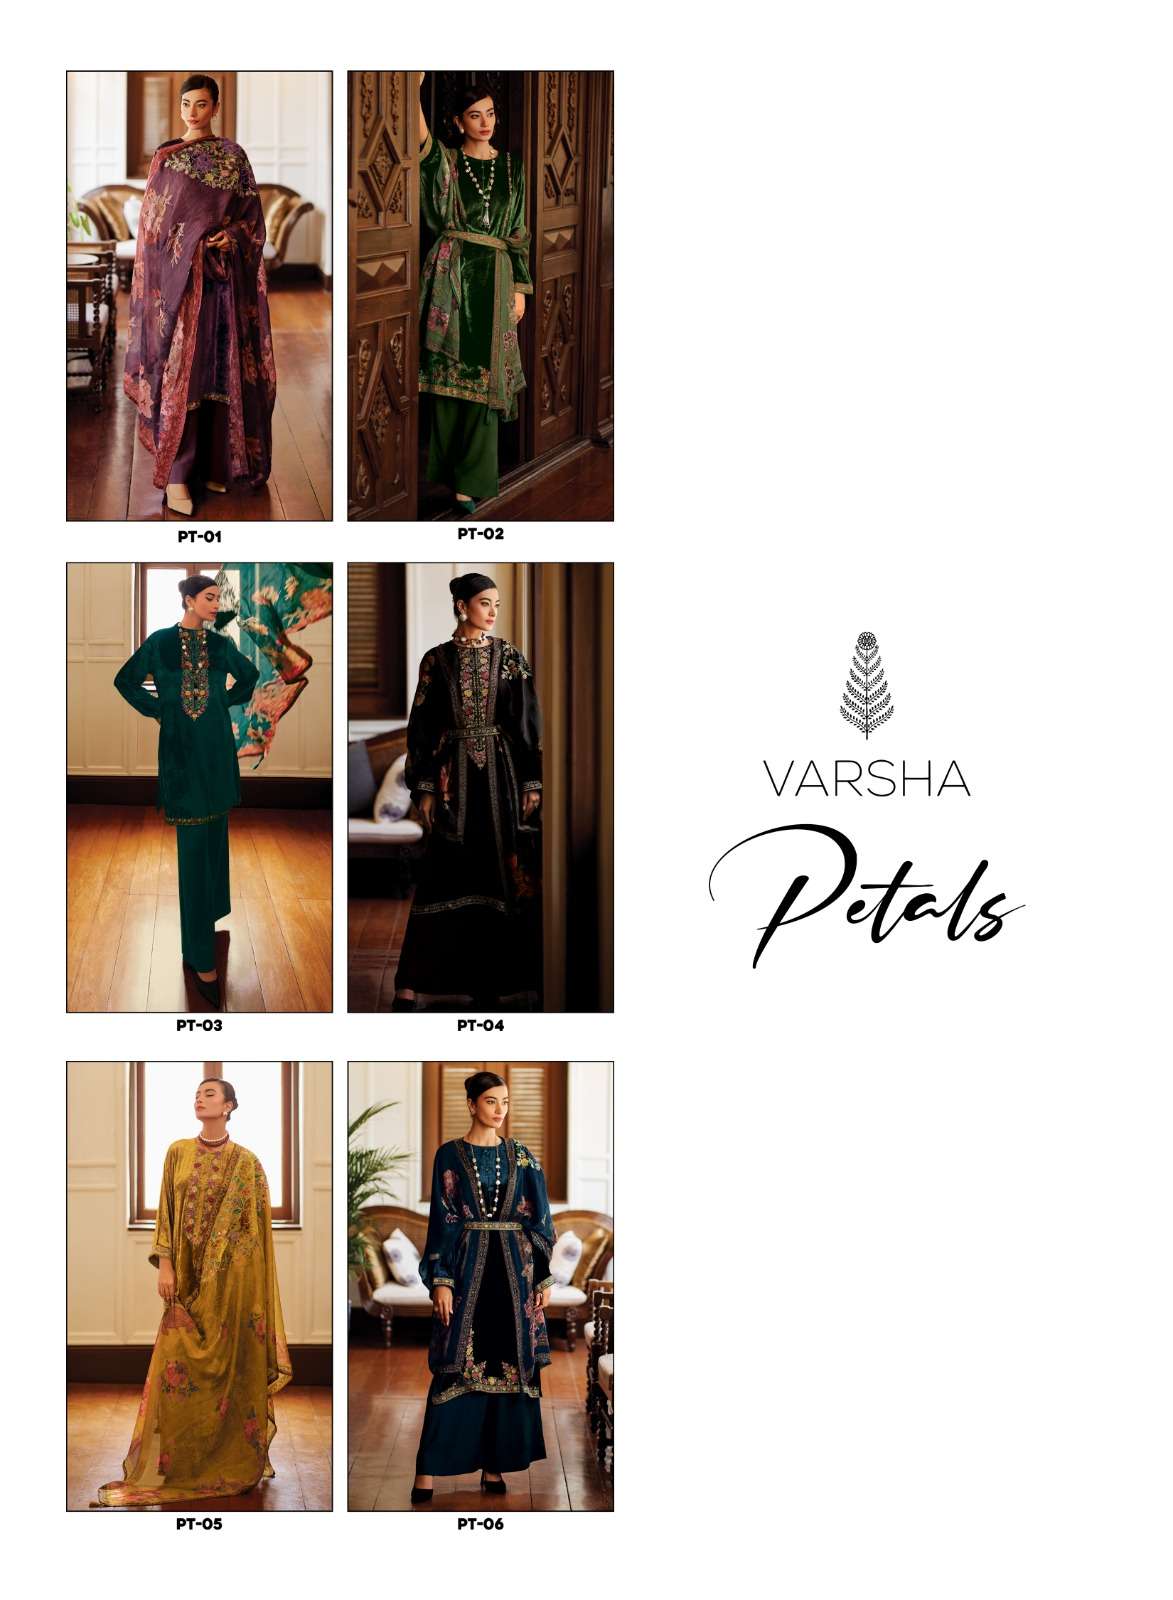 Varsha fashion petals 01-06 series velvet embroidery work salwar suits winter collection wholesale rates